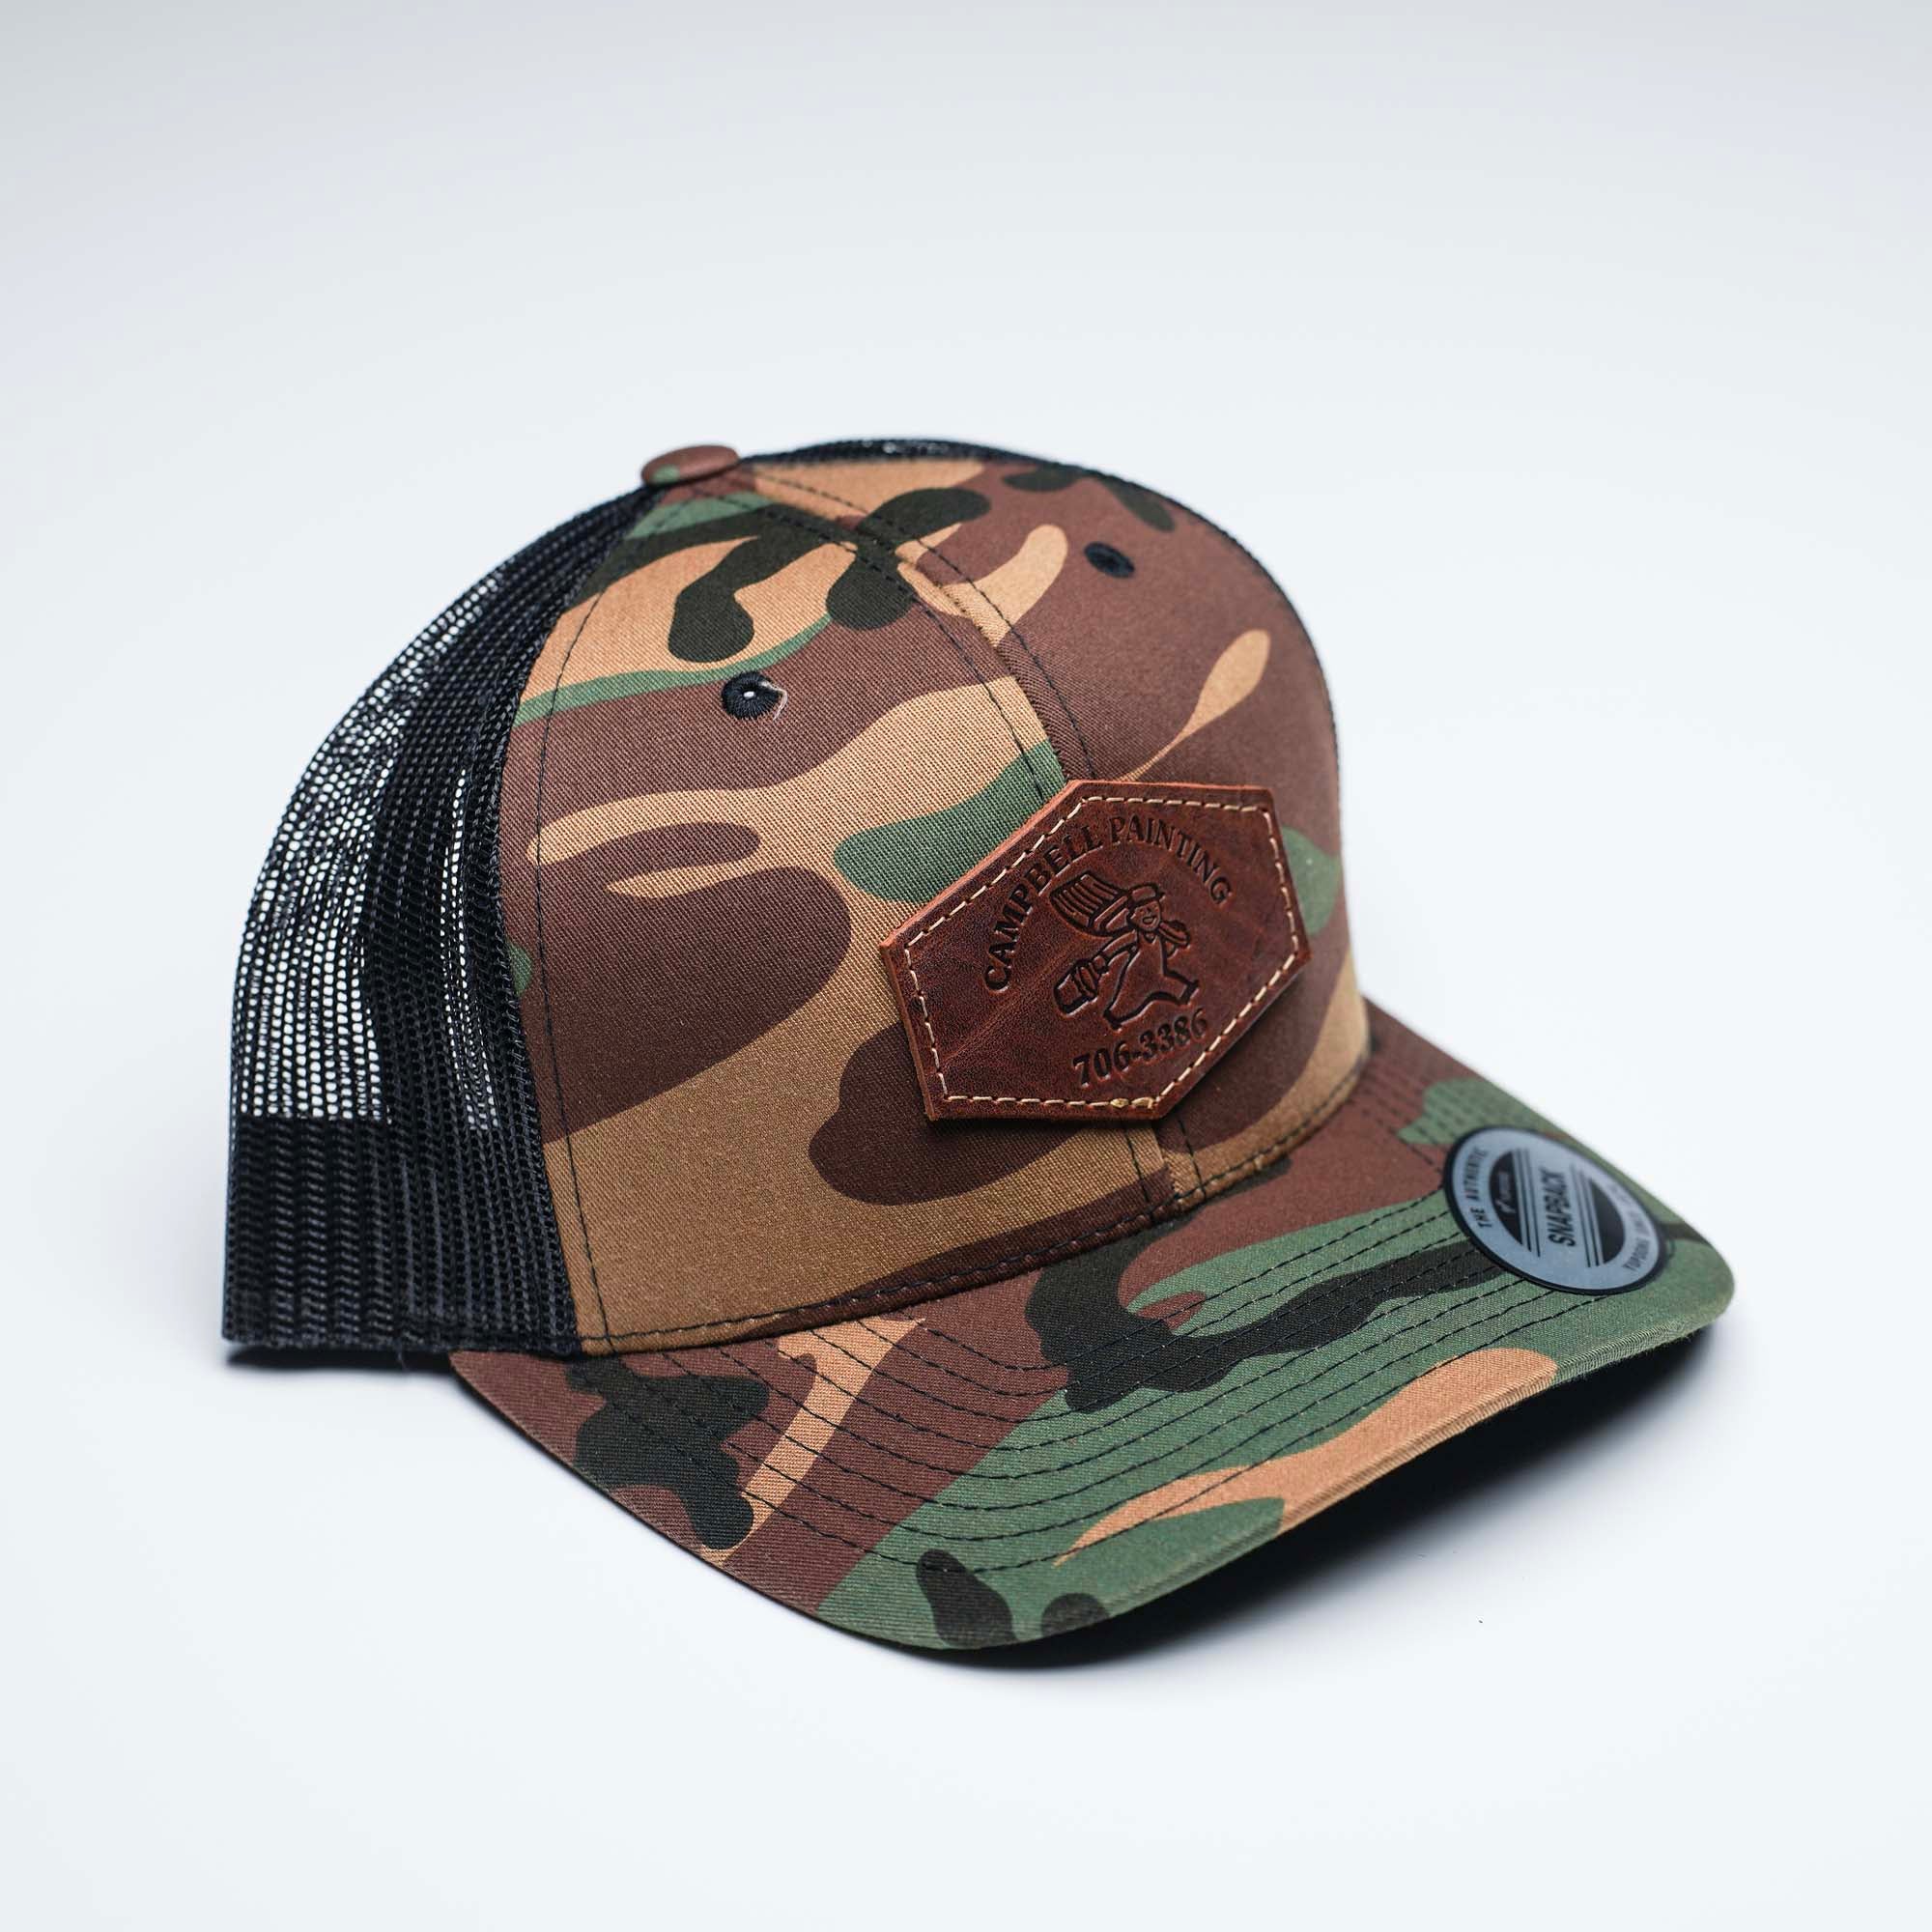 Debossed Heat Pressed - Yupoong 6606 Cap Leather Patch Camo Trucker Hat with YOUR LOGO